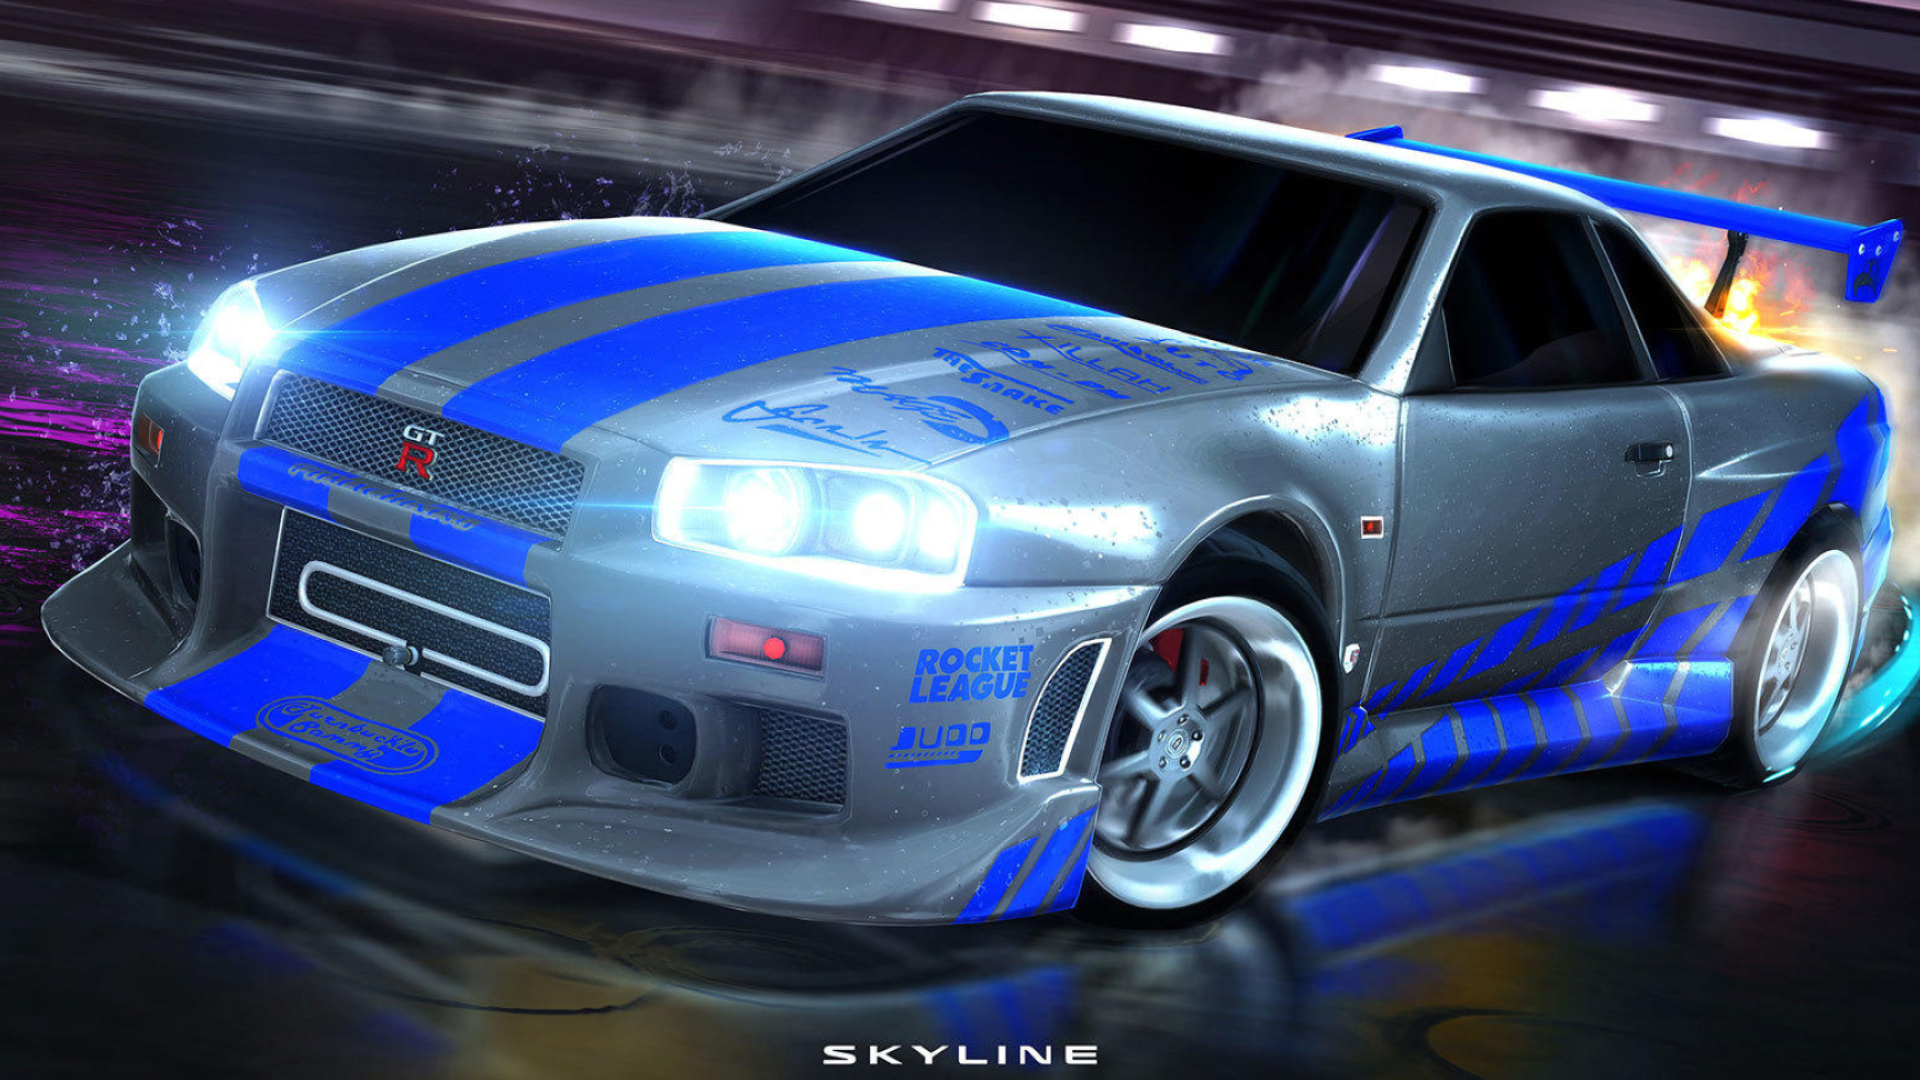 Fast and Furious Skyline, Fate of the Furious Wallpaper, 1920x1080 Full HD Desktop